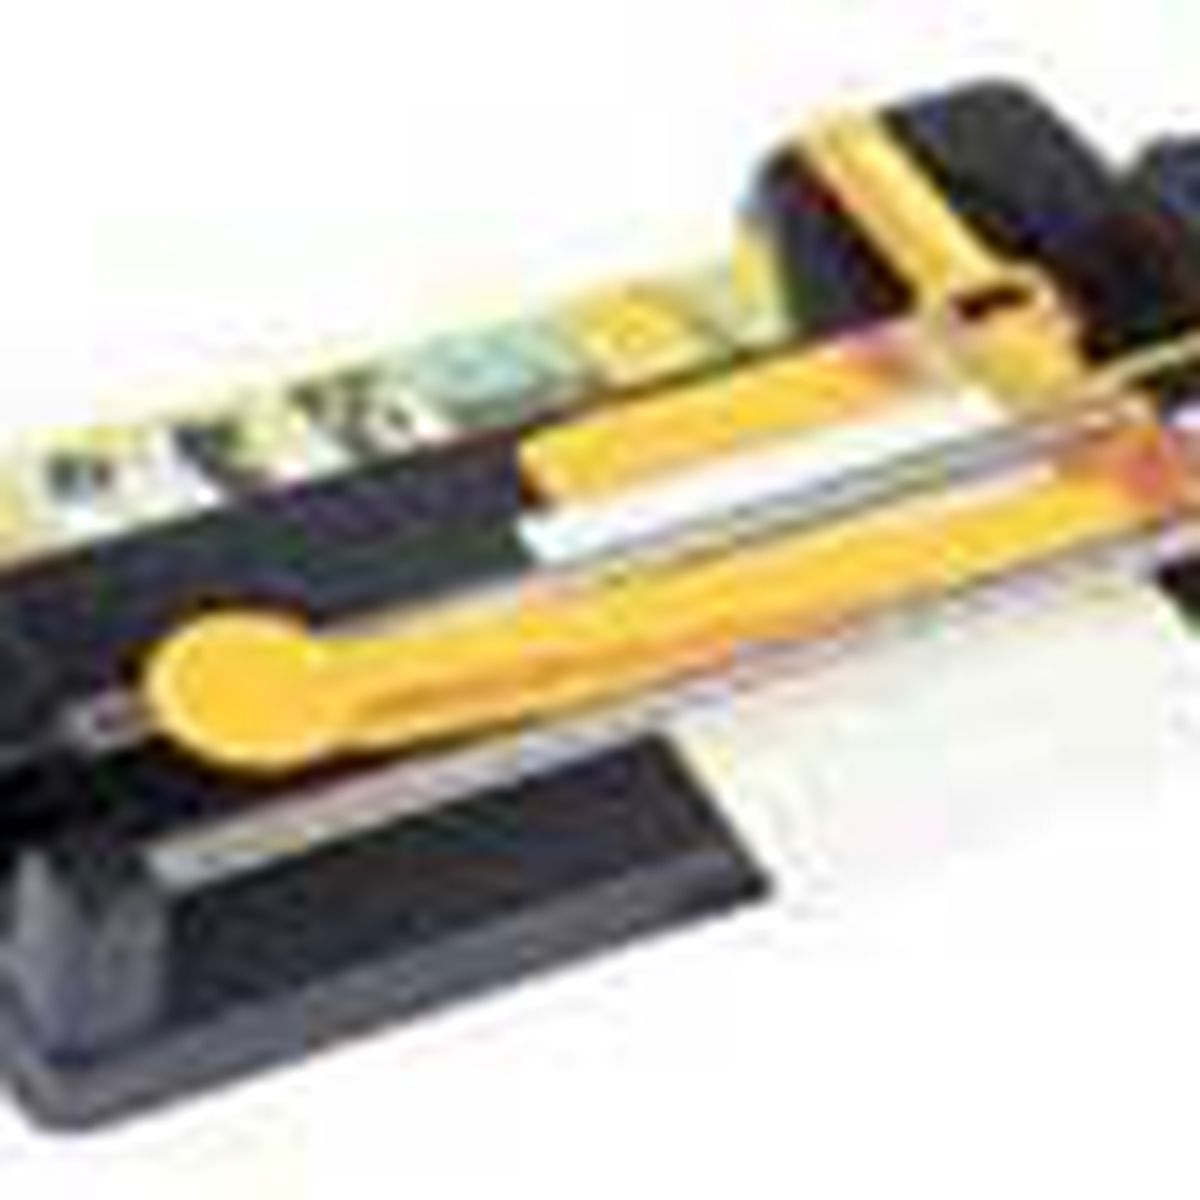 score-and-snap tile cutter